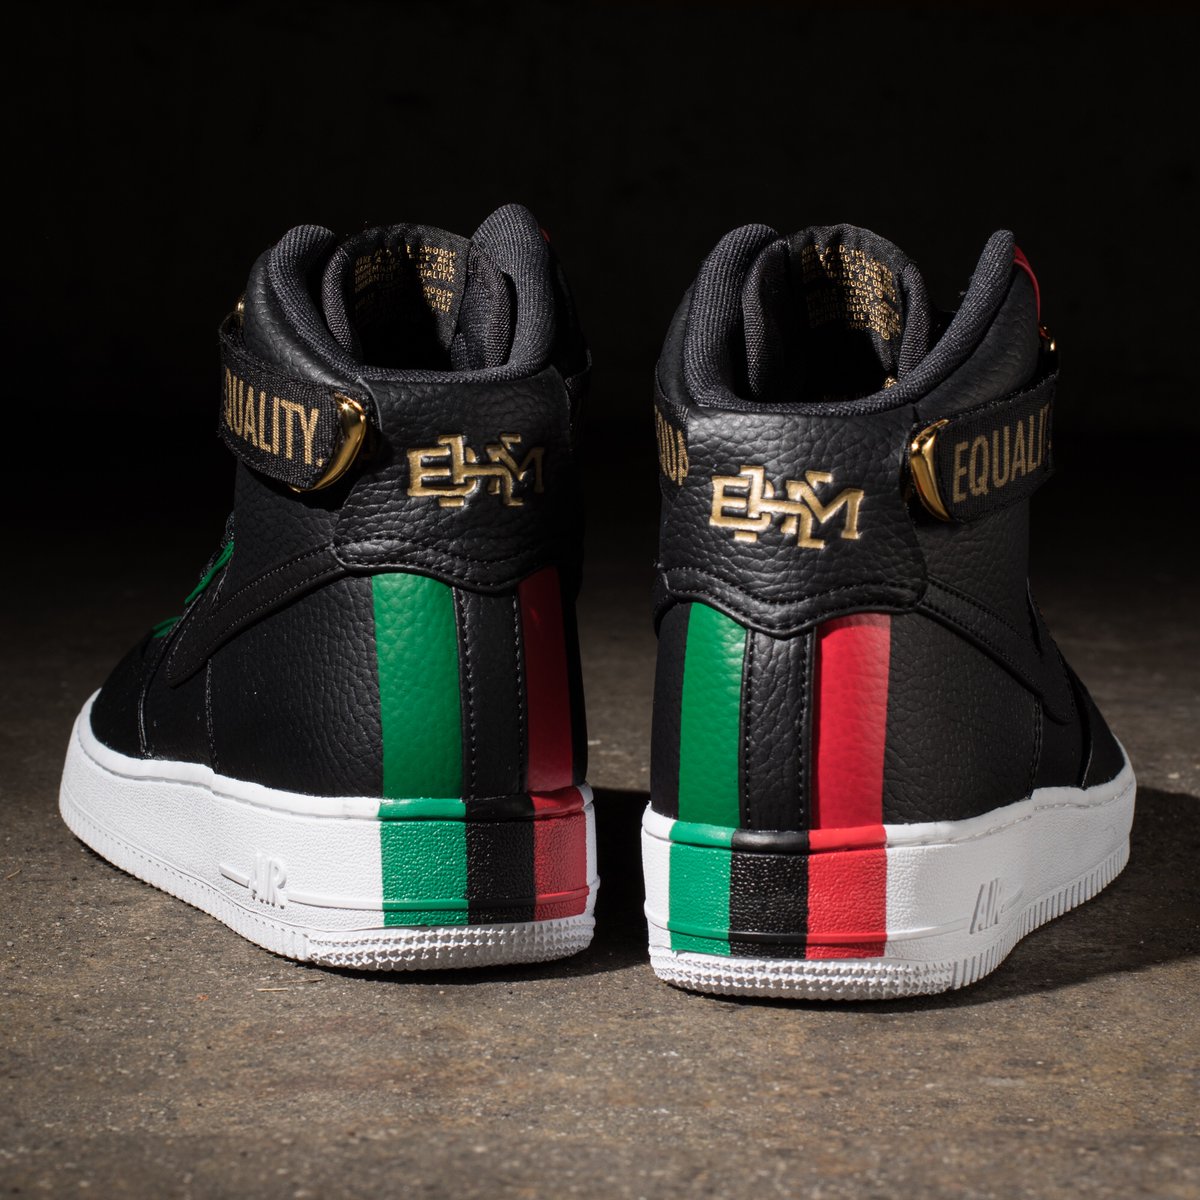 equality air force 1 high